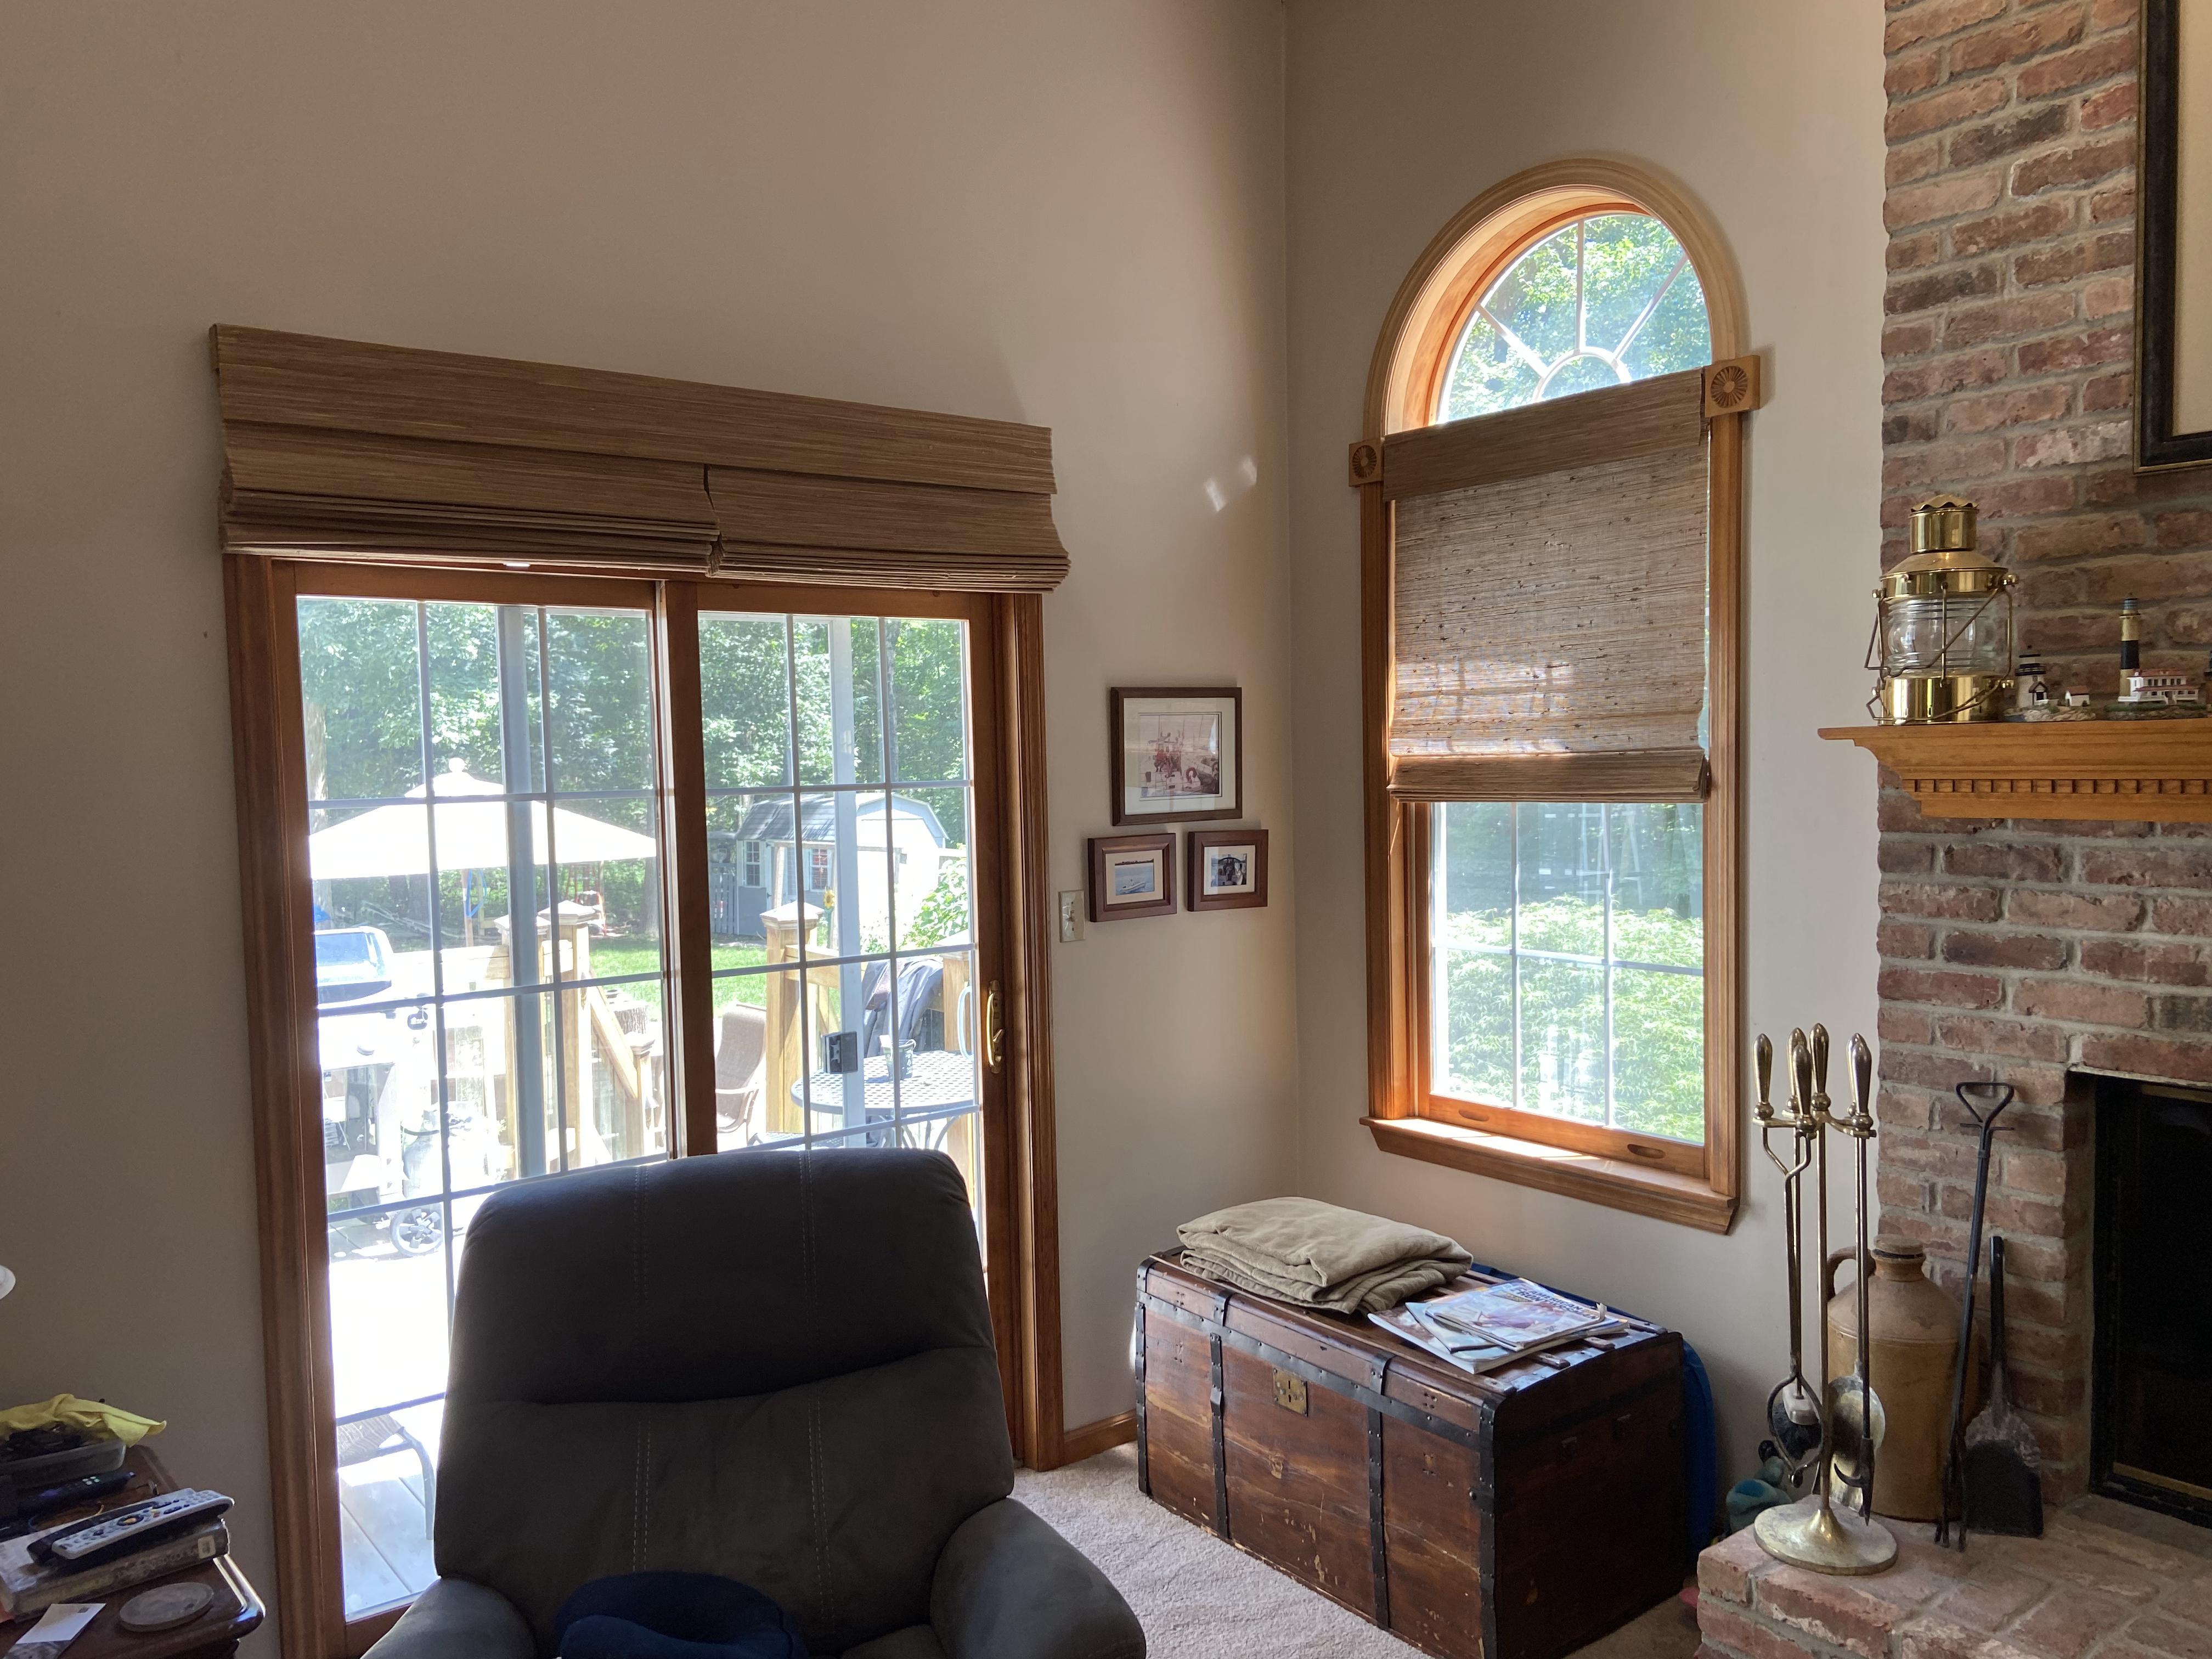 Create a striking focal point in your room, like the one in this home in Hampton, NJ, with our wonderful Woven Wood Shades.  BudgetBlindsPhillipsburg  HamptonNJ  WovenWoodShades  ShadesOfBeauty  FreeConsultation  WindowWednesday